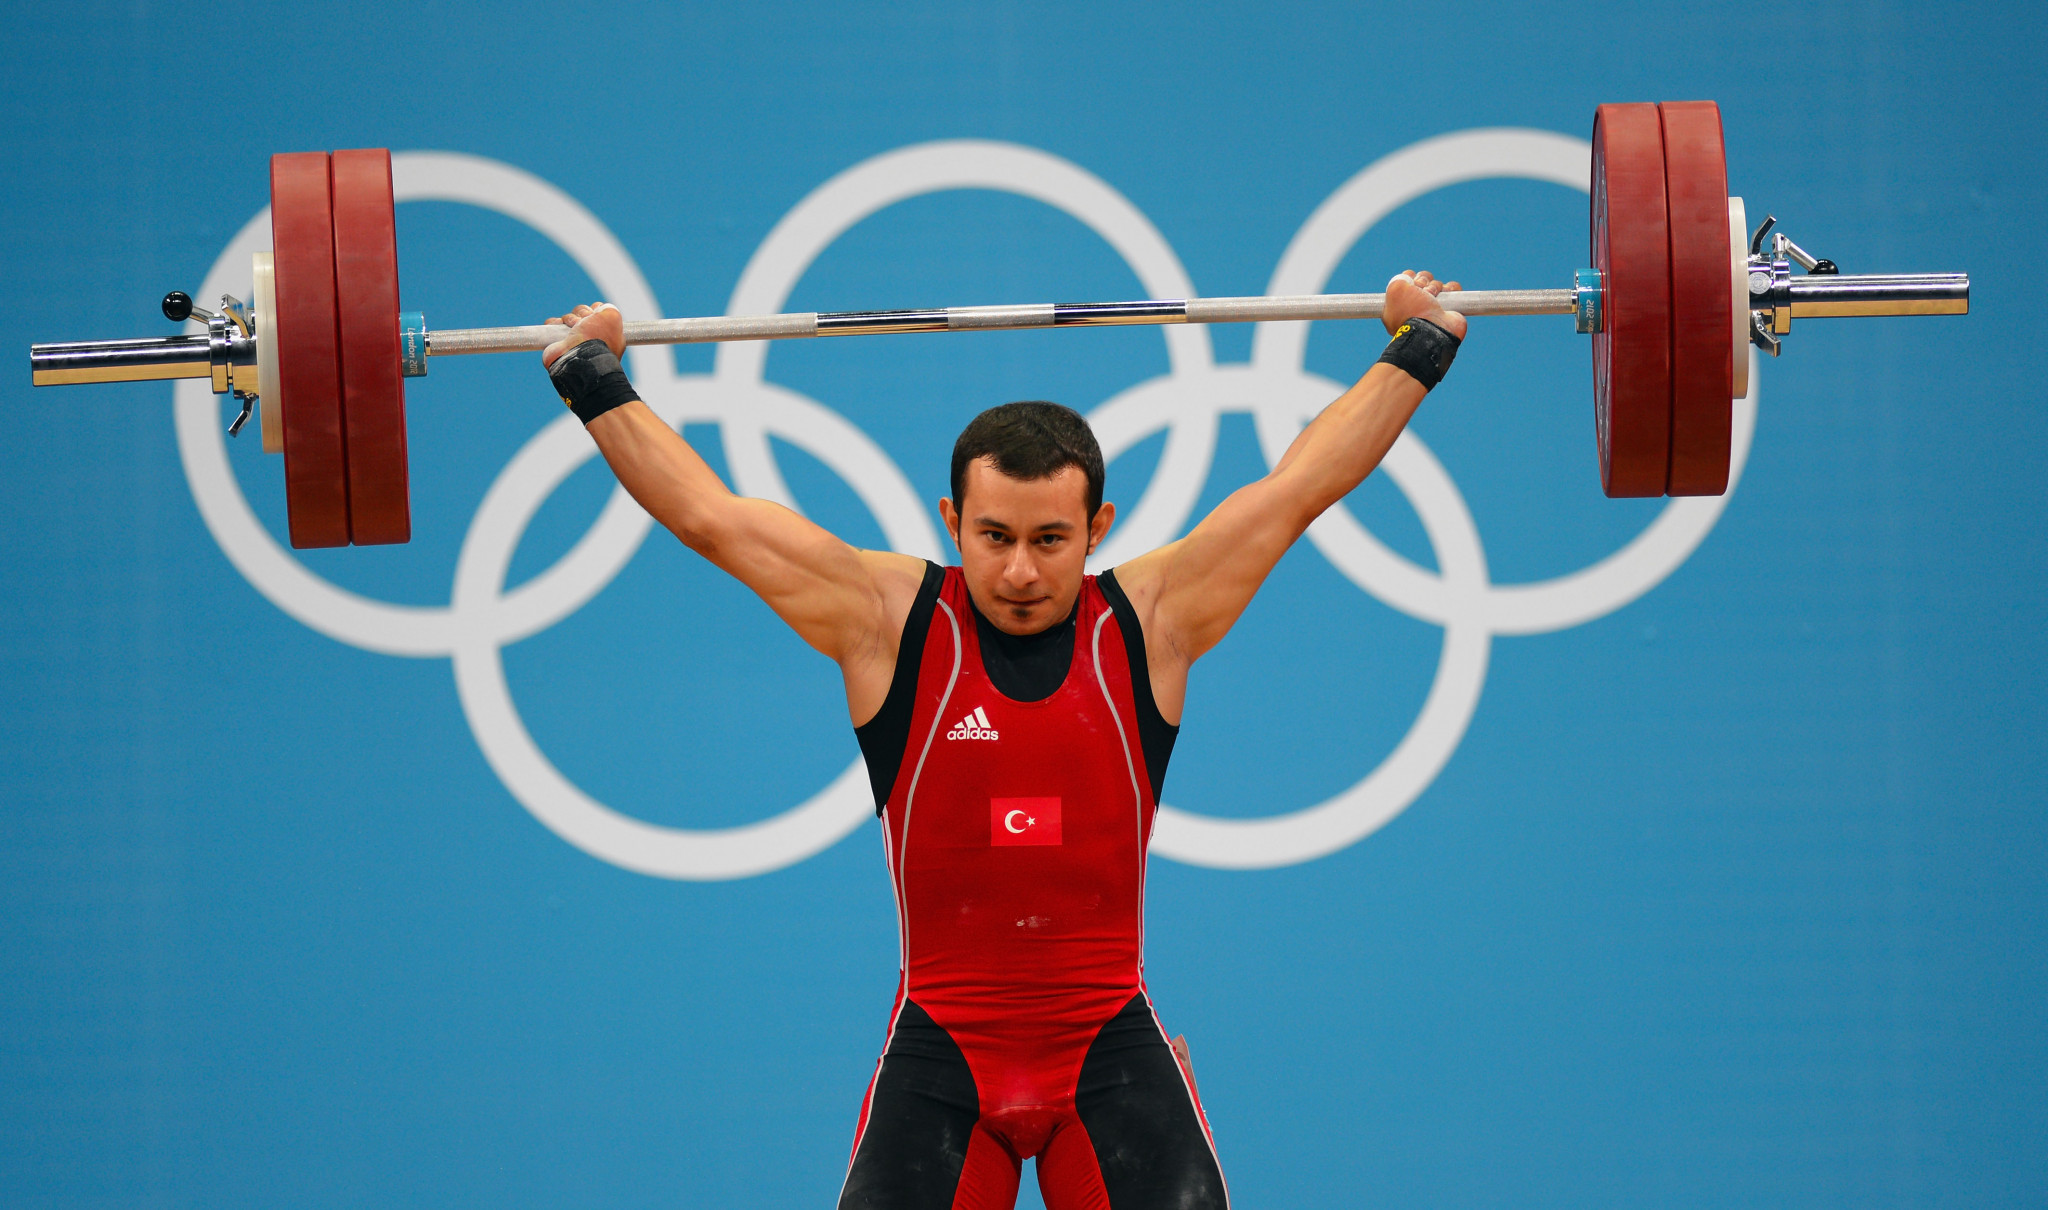 Turkish weightlifter Bilgin has result from London 2012 wiped for doping in IOC retests